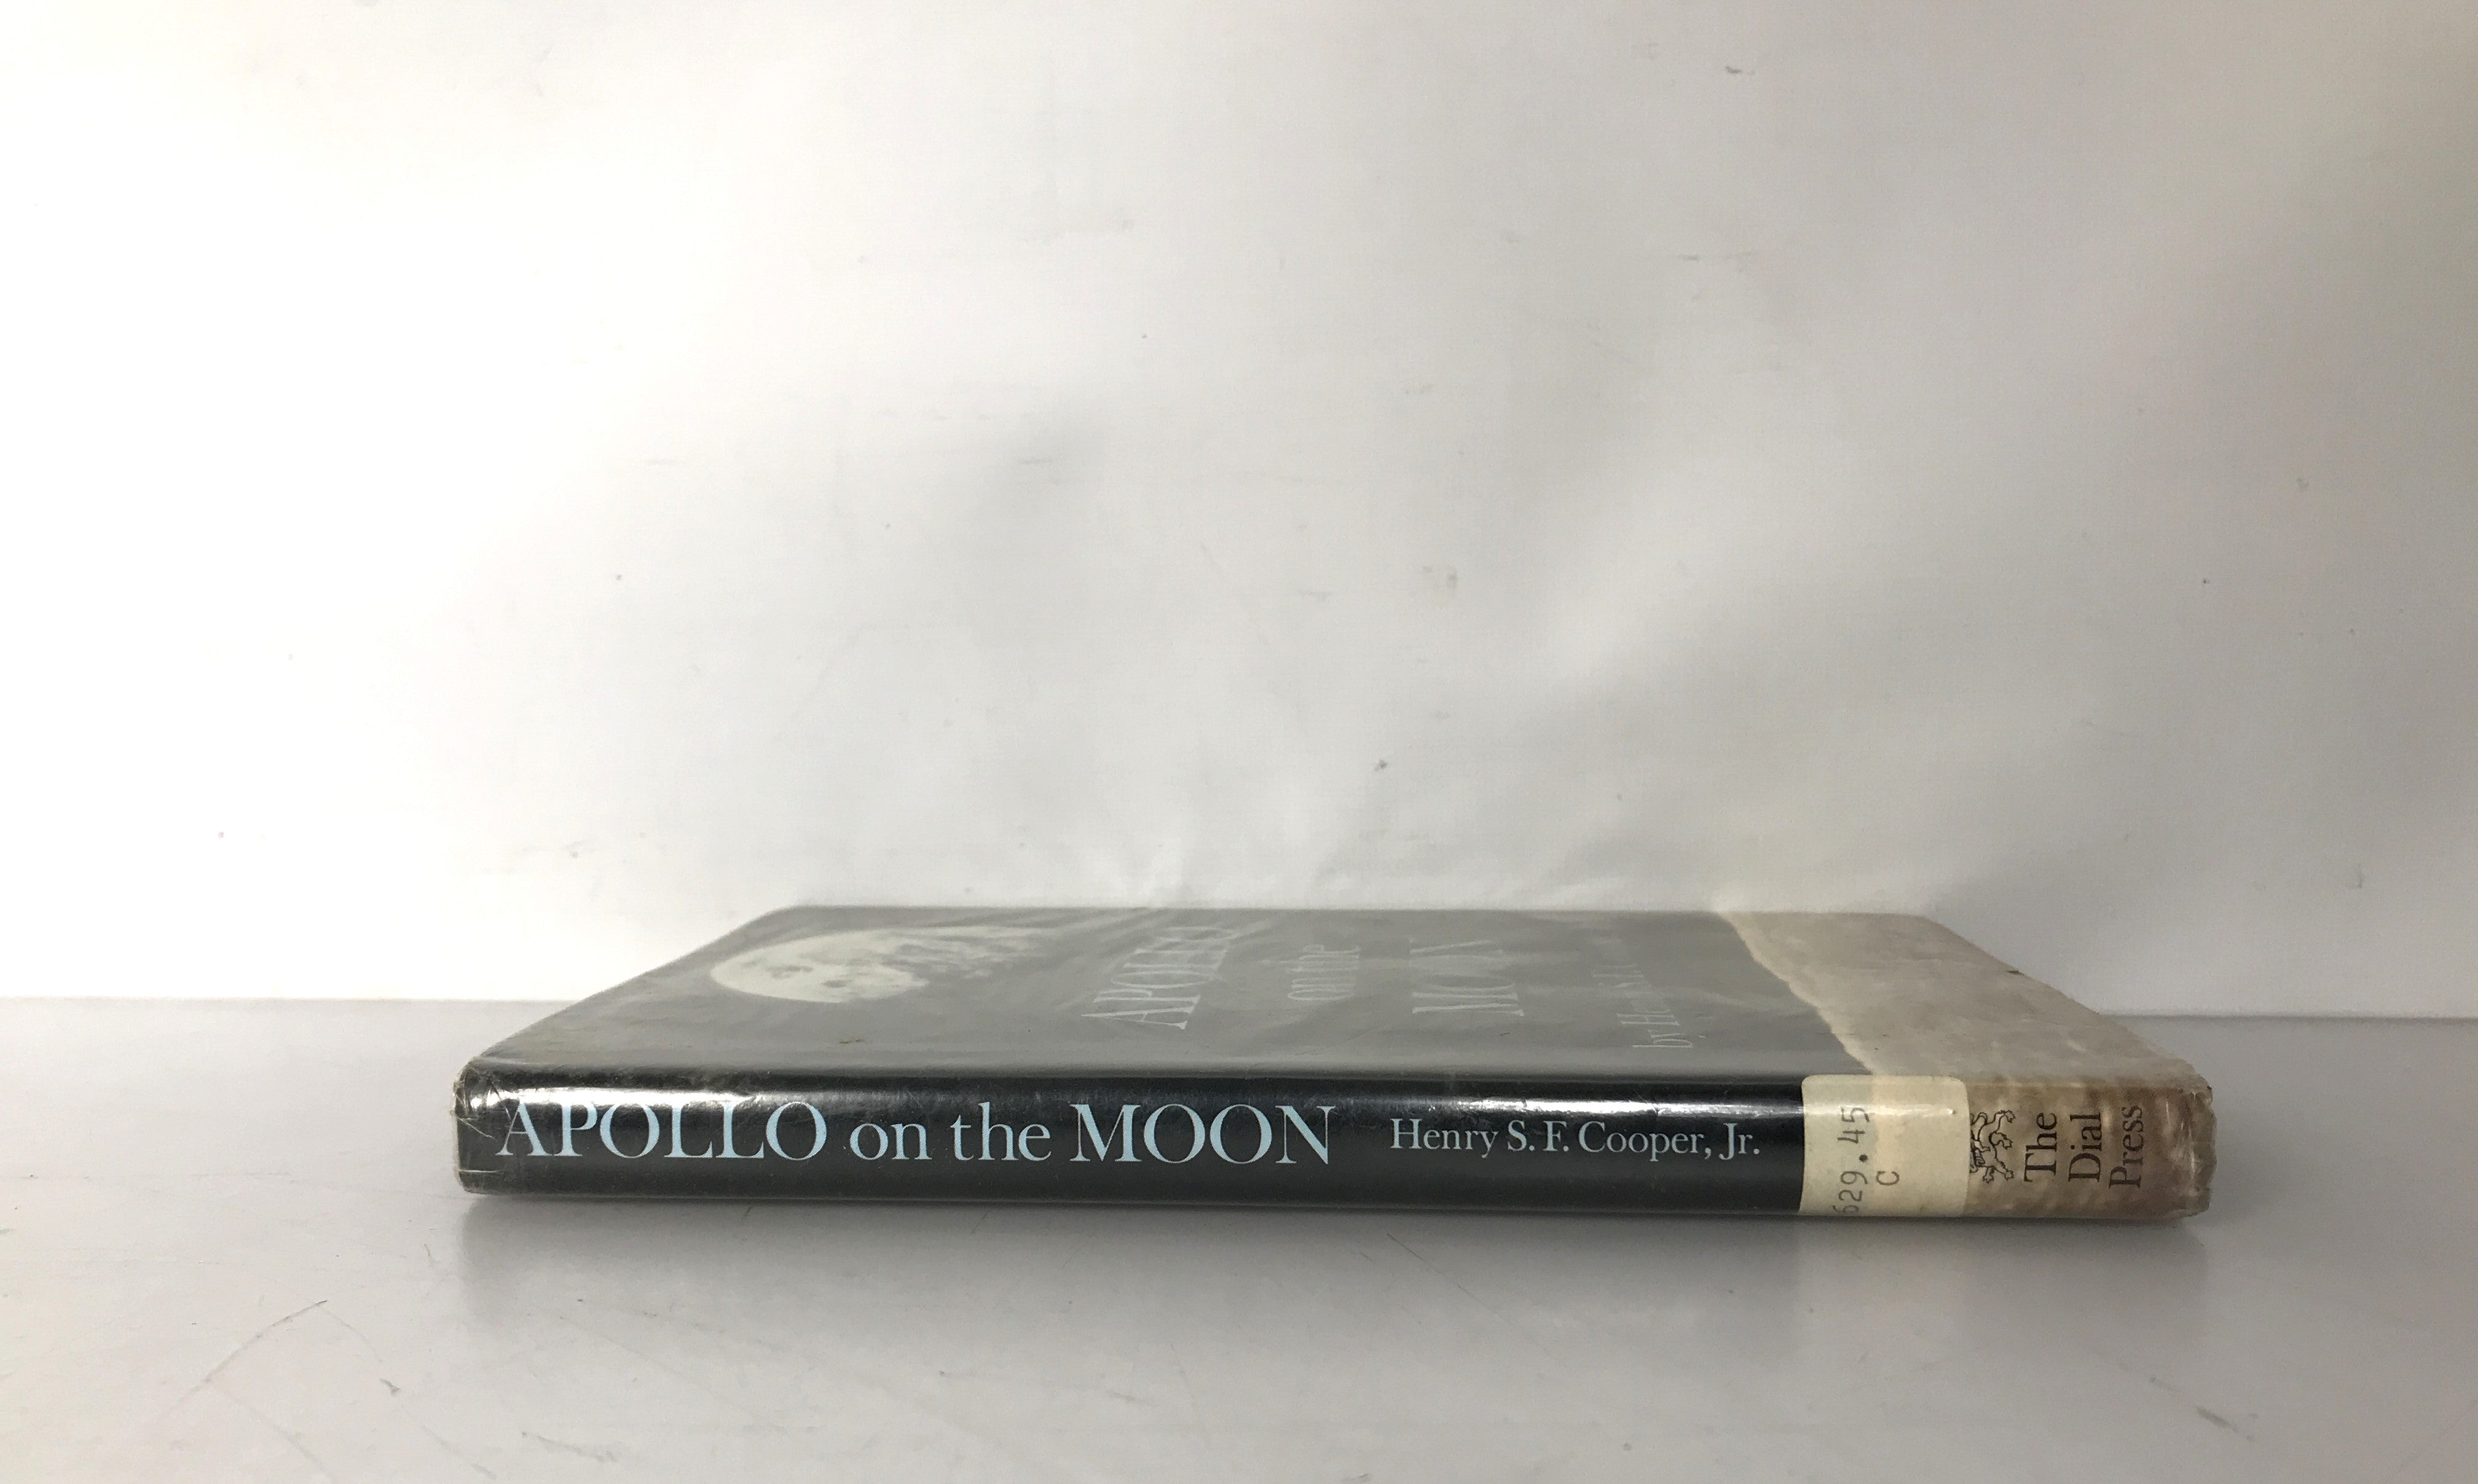 Apollo on the Moon by Henry S.F. Cooper Second Printing 1969 HC DJ